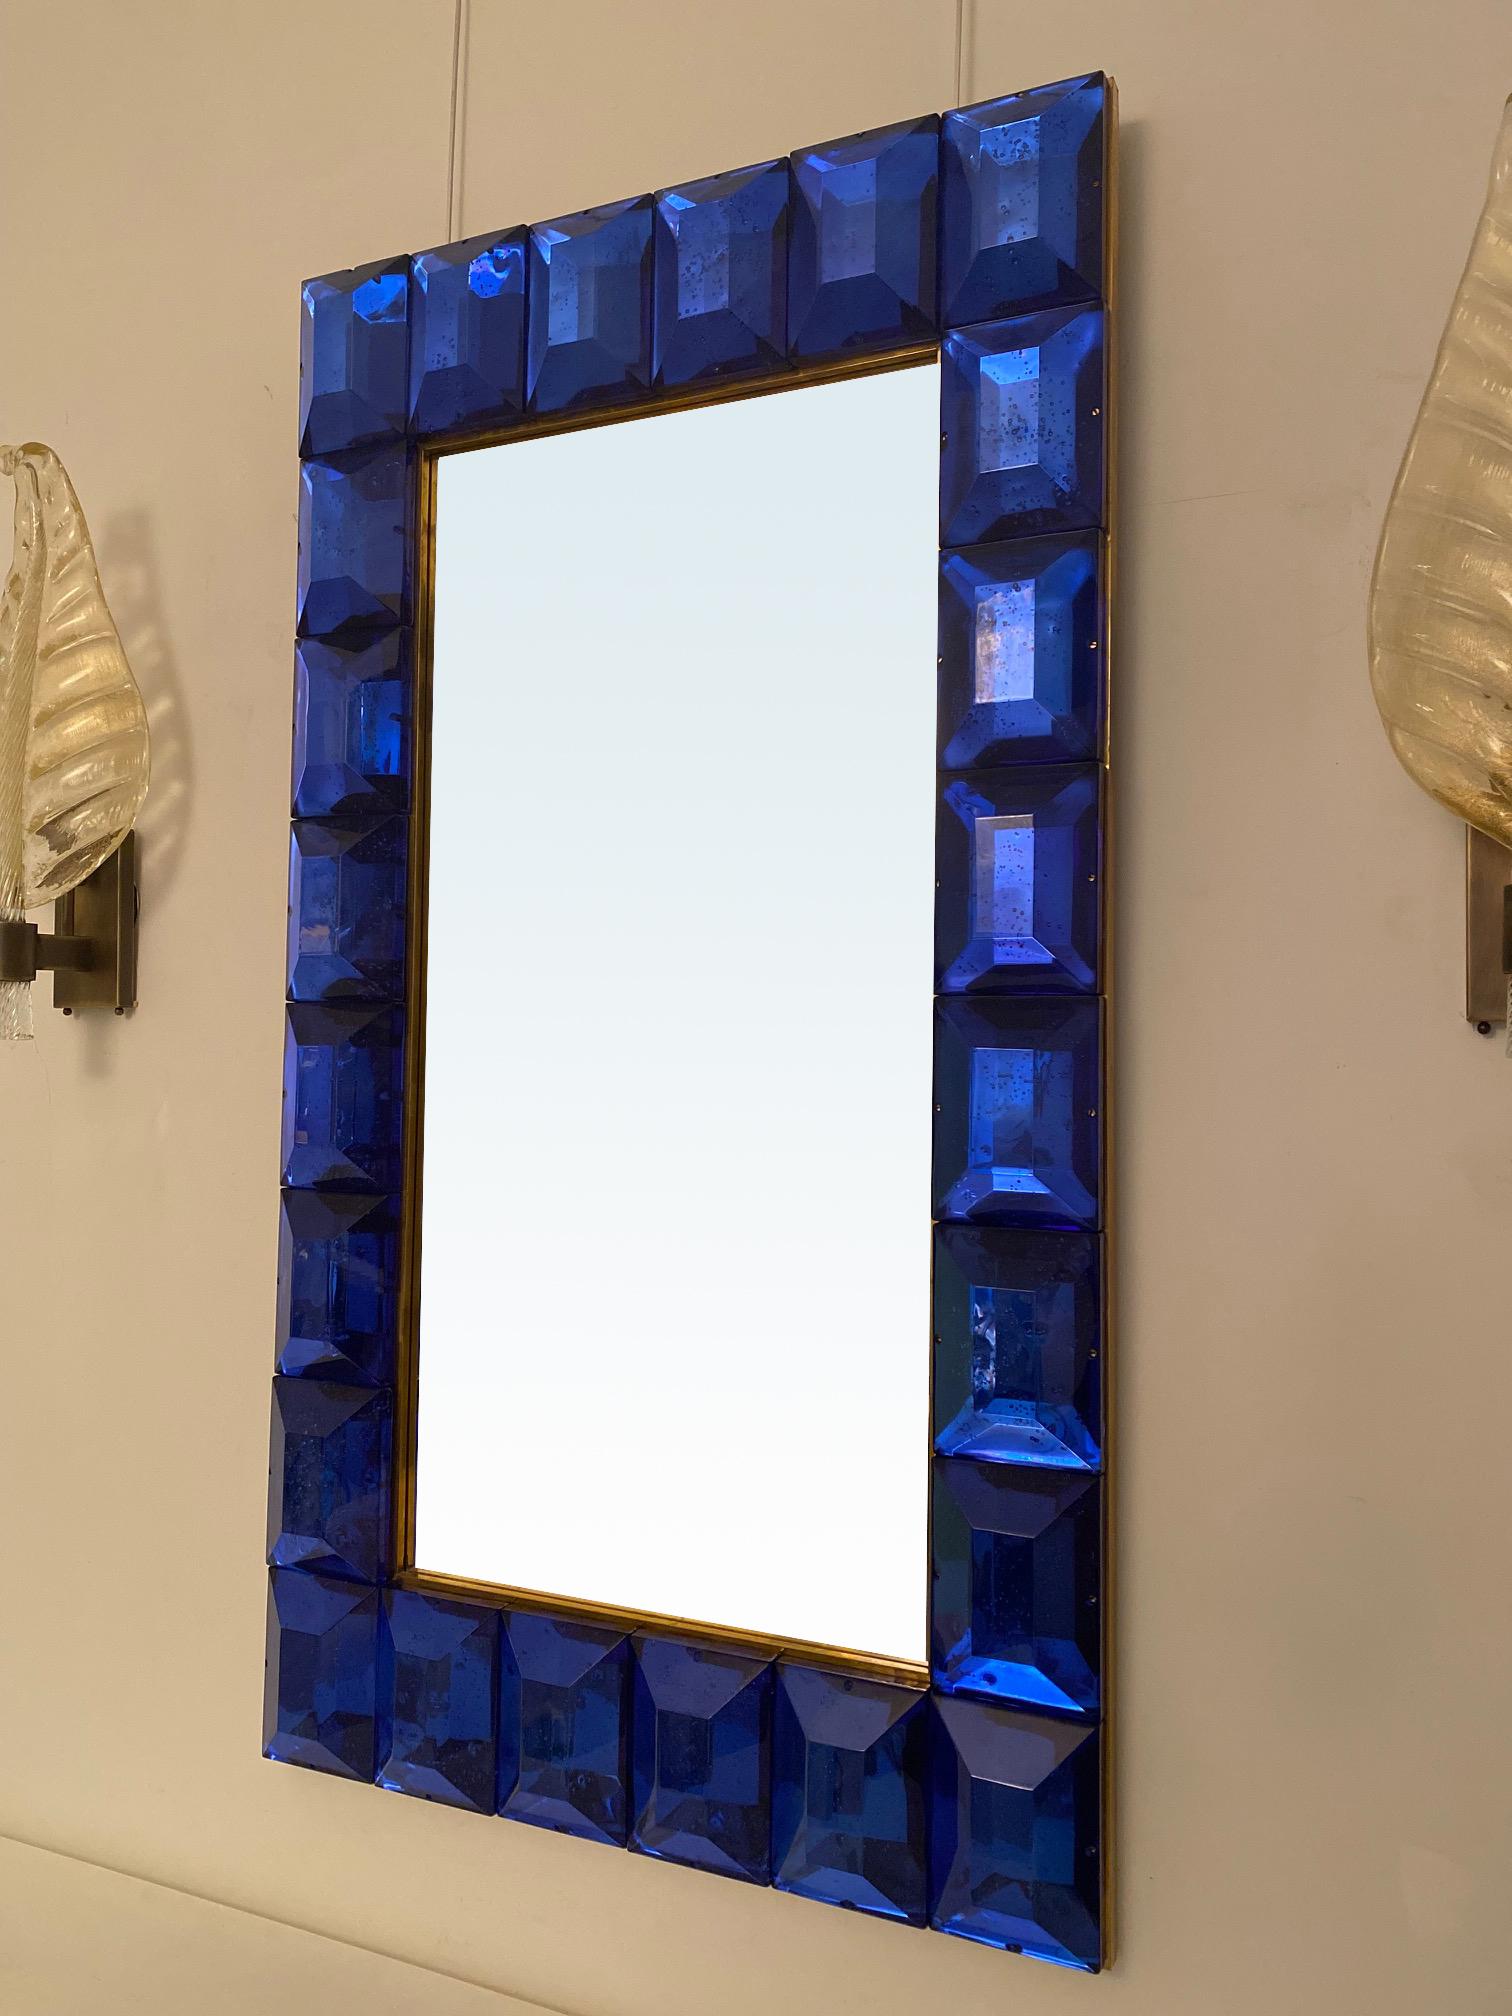 Large cobalt blue diamond cut murano glass mirror.
Vivid and intense cobalt blue glass block with naturally occurring air inclusions throughout
Highly polished faceted pattern
Brass gallery
Luxury handcrafted by a team of artisans in Venice,